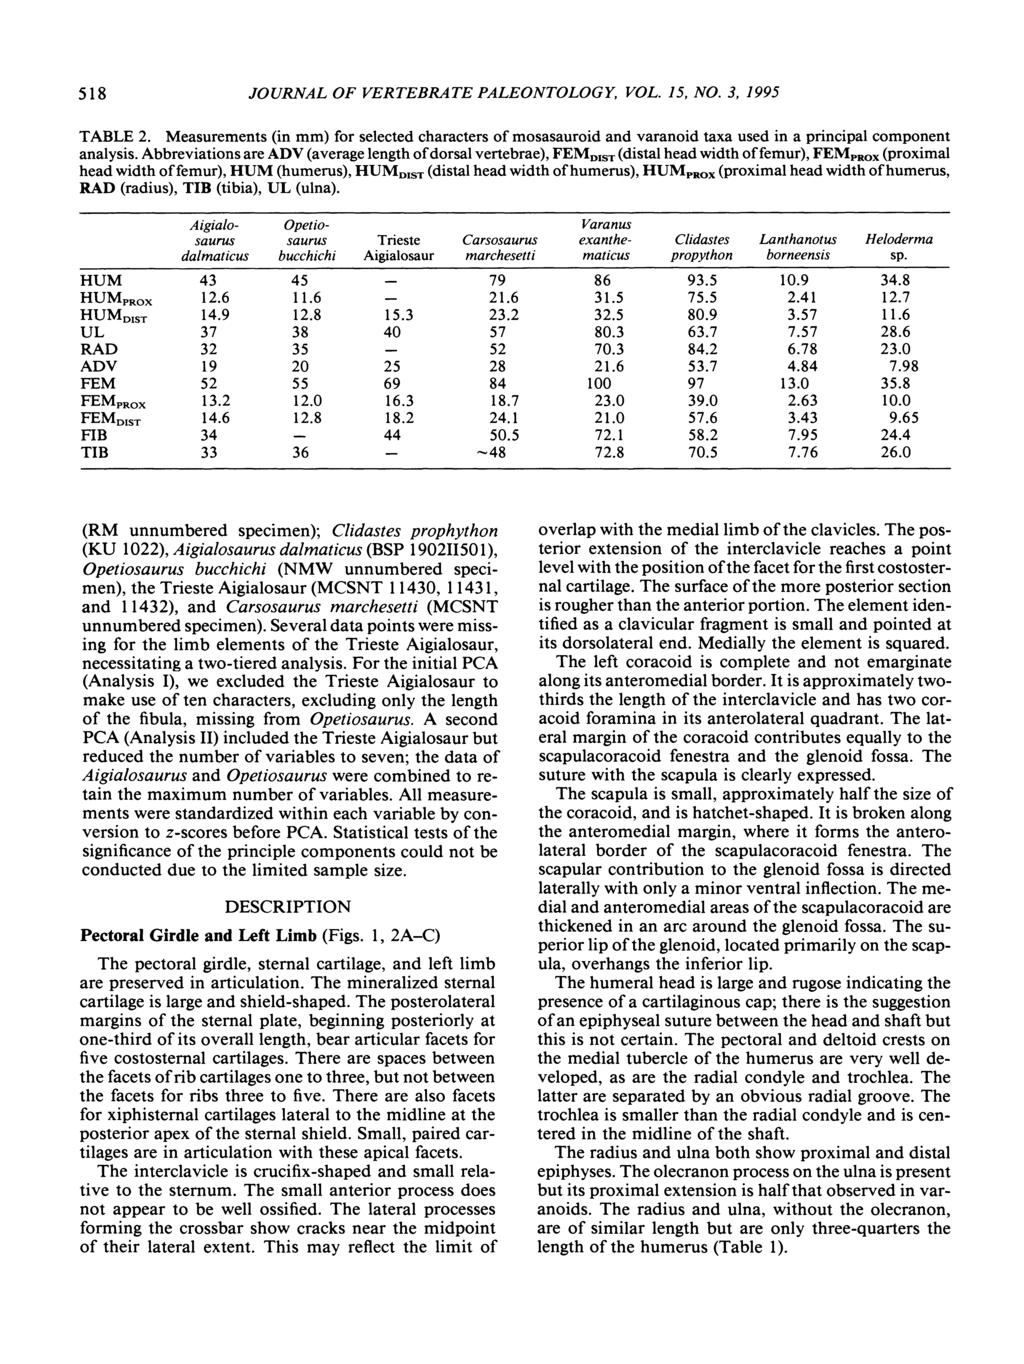 518 JOURNAL OF VERTEBRATE PALEONTOLOGY, VOL. 15, NO.3, 1995 TABLE 2. Measurements (in mm) for selected characters of mosasauroid and varanoid taxa used in a principal component analysis.